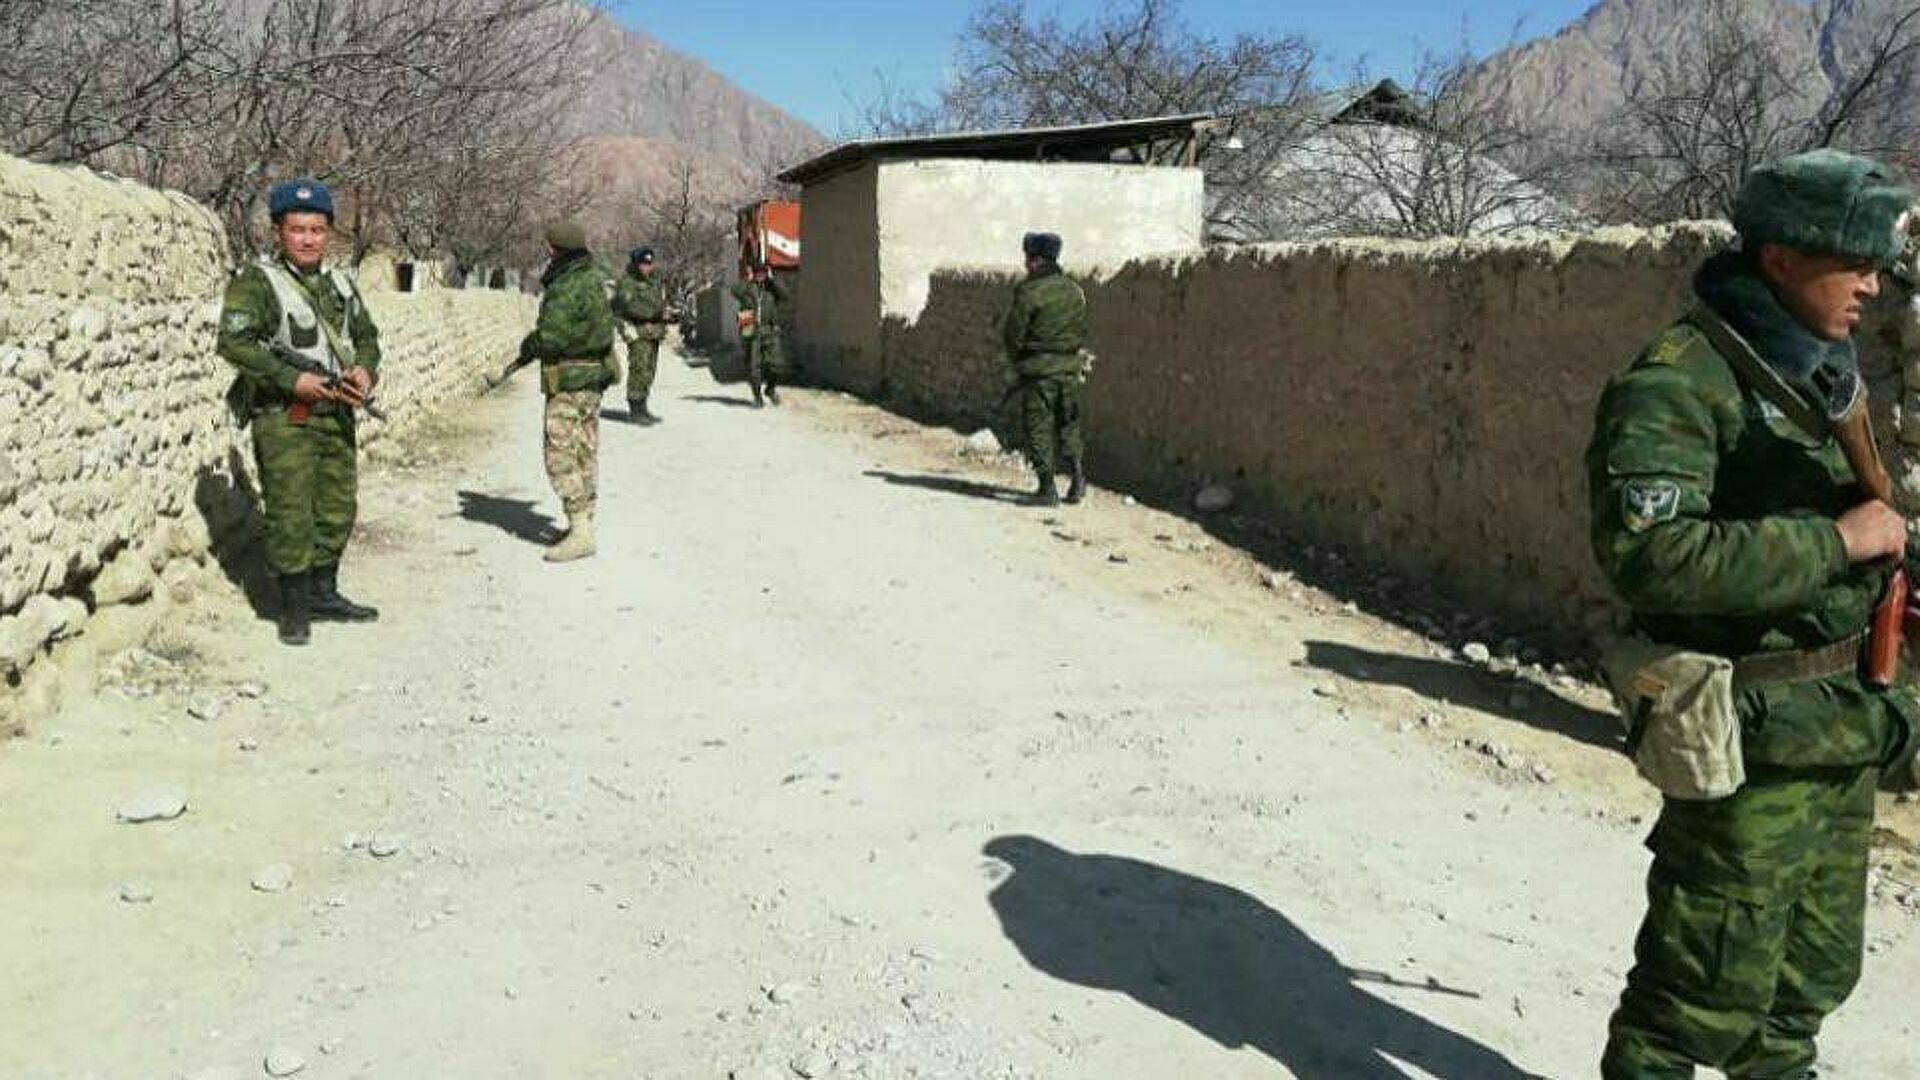 Ministry of Health of Kyrgyzstan announced 13 dead in conflict on border with Tajikistan